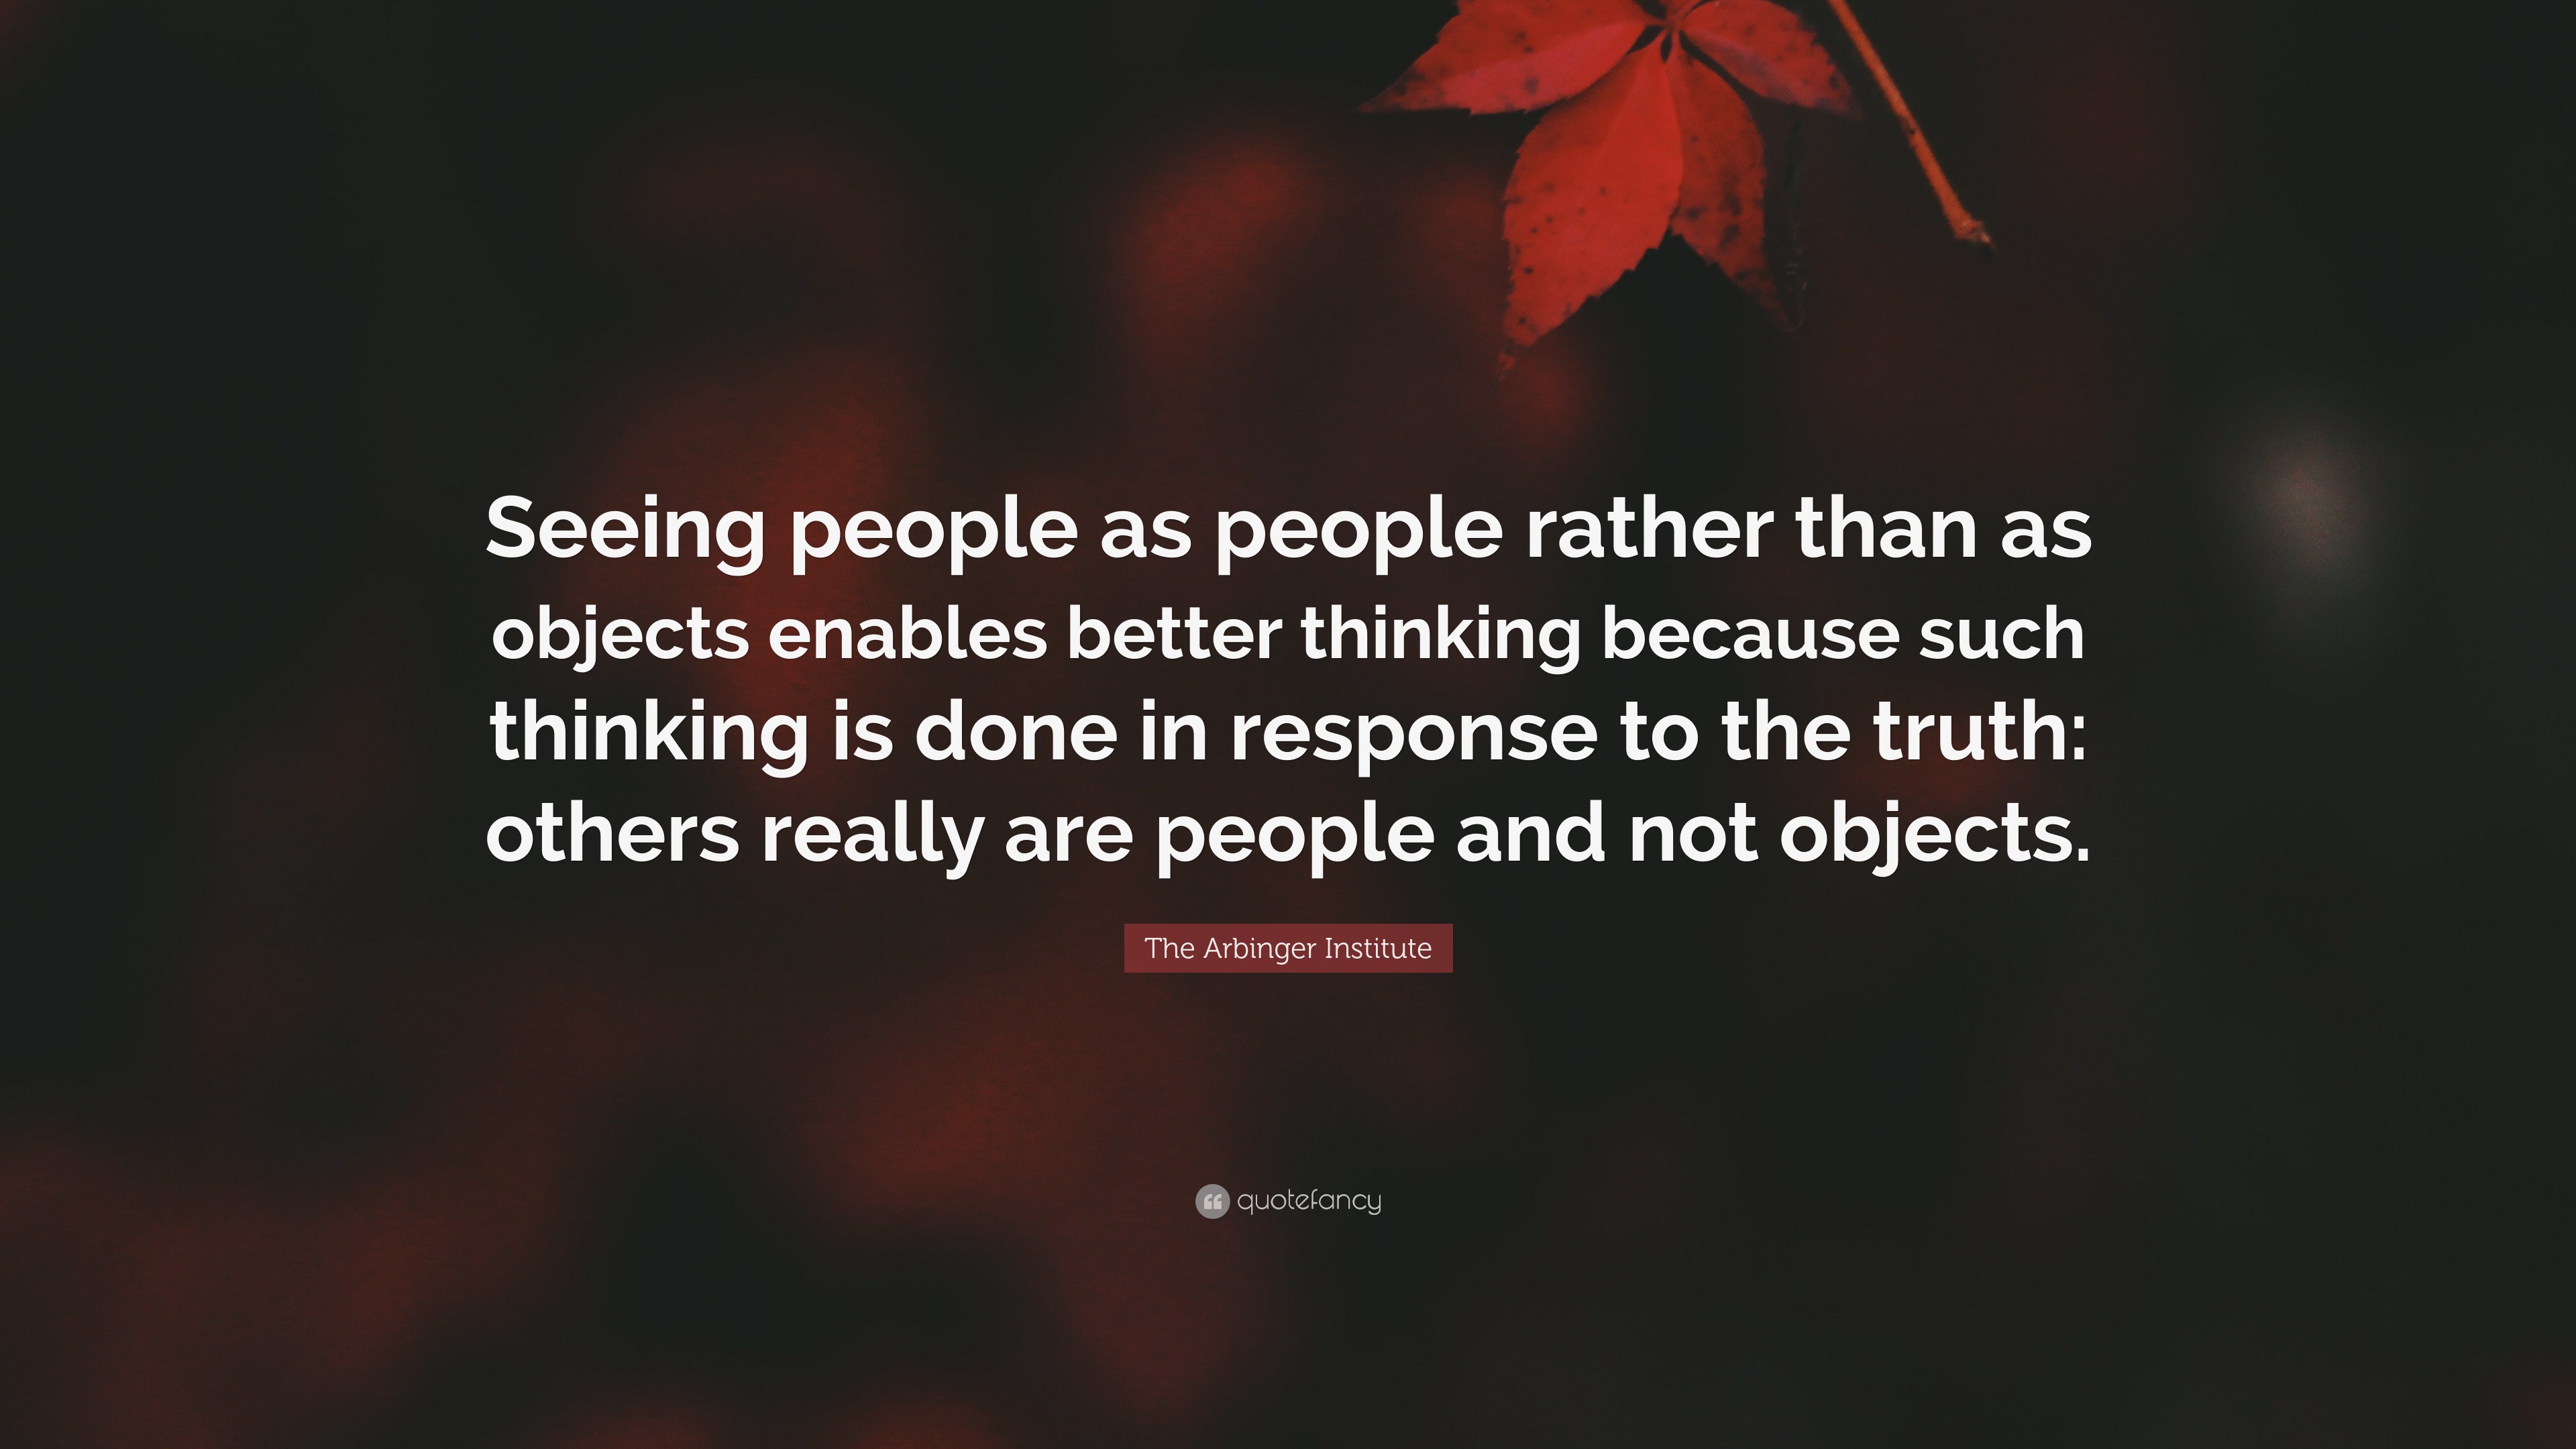 The Arbinger Institute Quote: “Seeing people as people rather than as ...